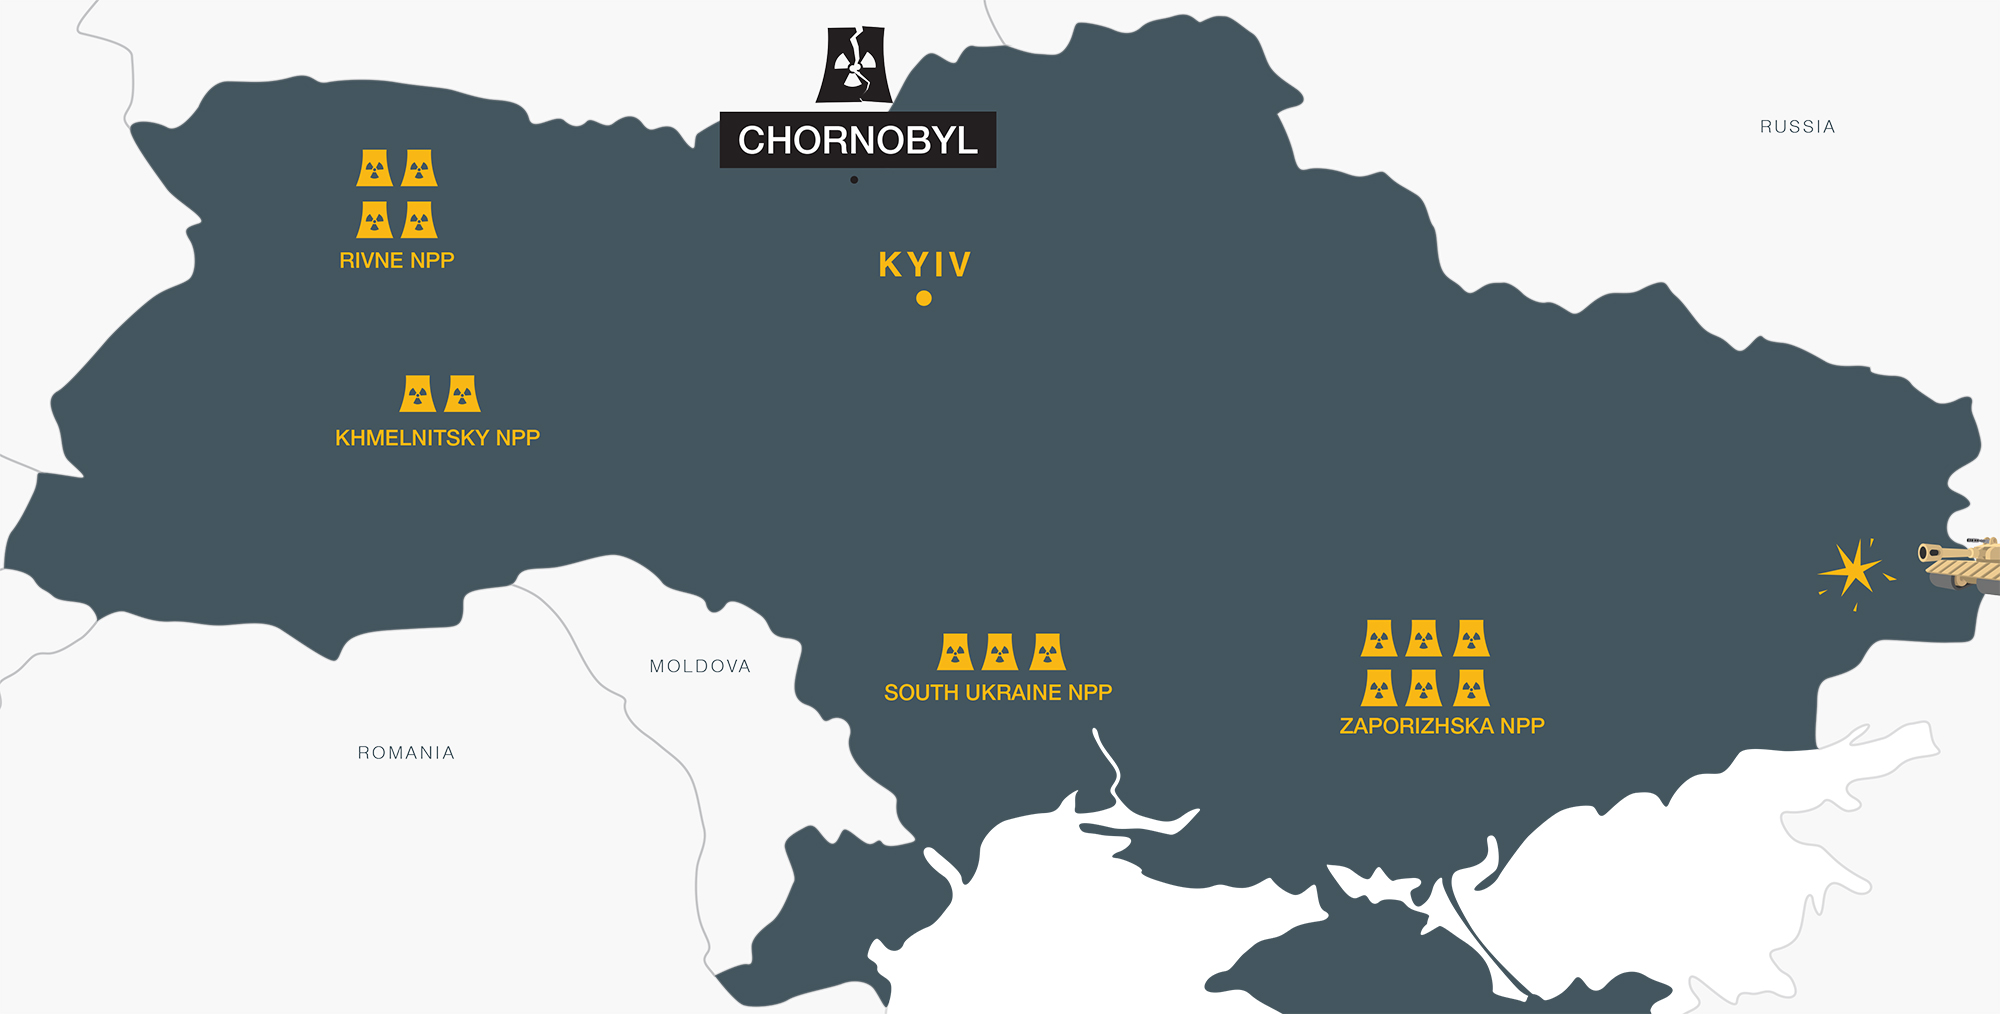 A map of Ukraine with the locations and sizes of nucelar power plants indicated.